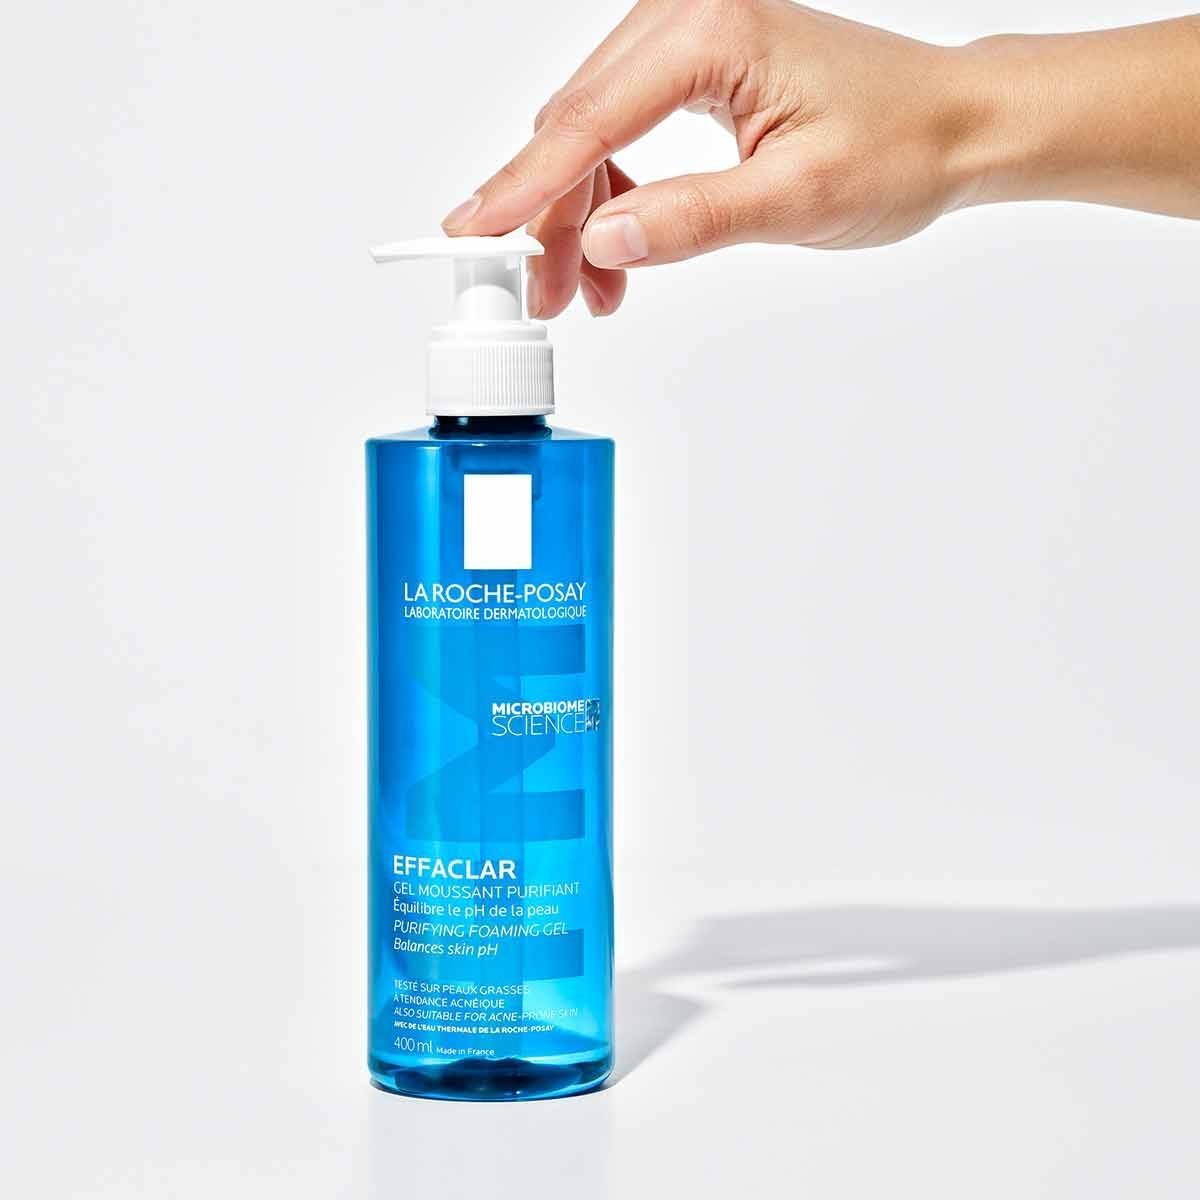 Larocheposay-ProductPage-Acne-Effaclar-Cleansing-Foaming-gel-Texture